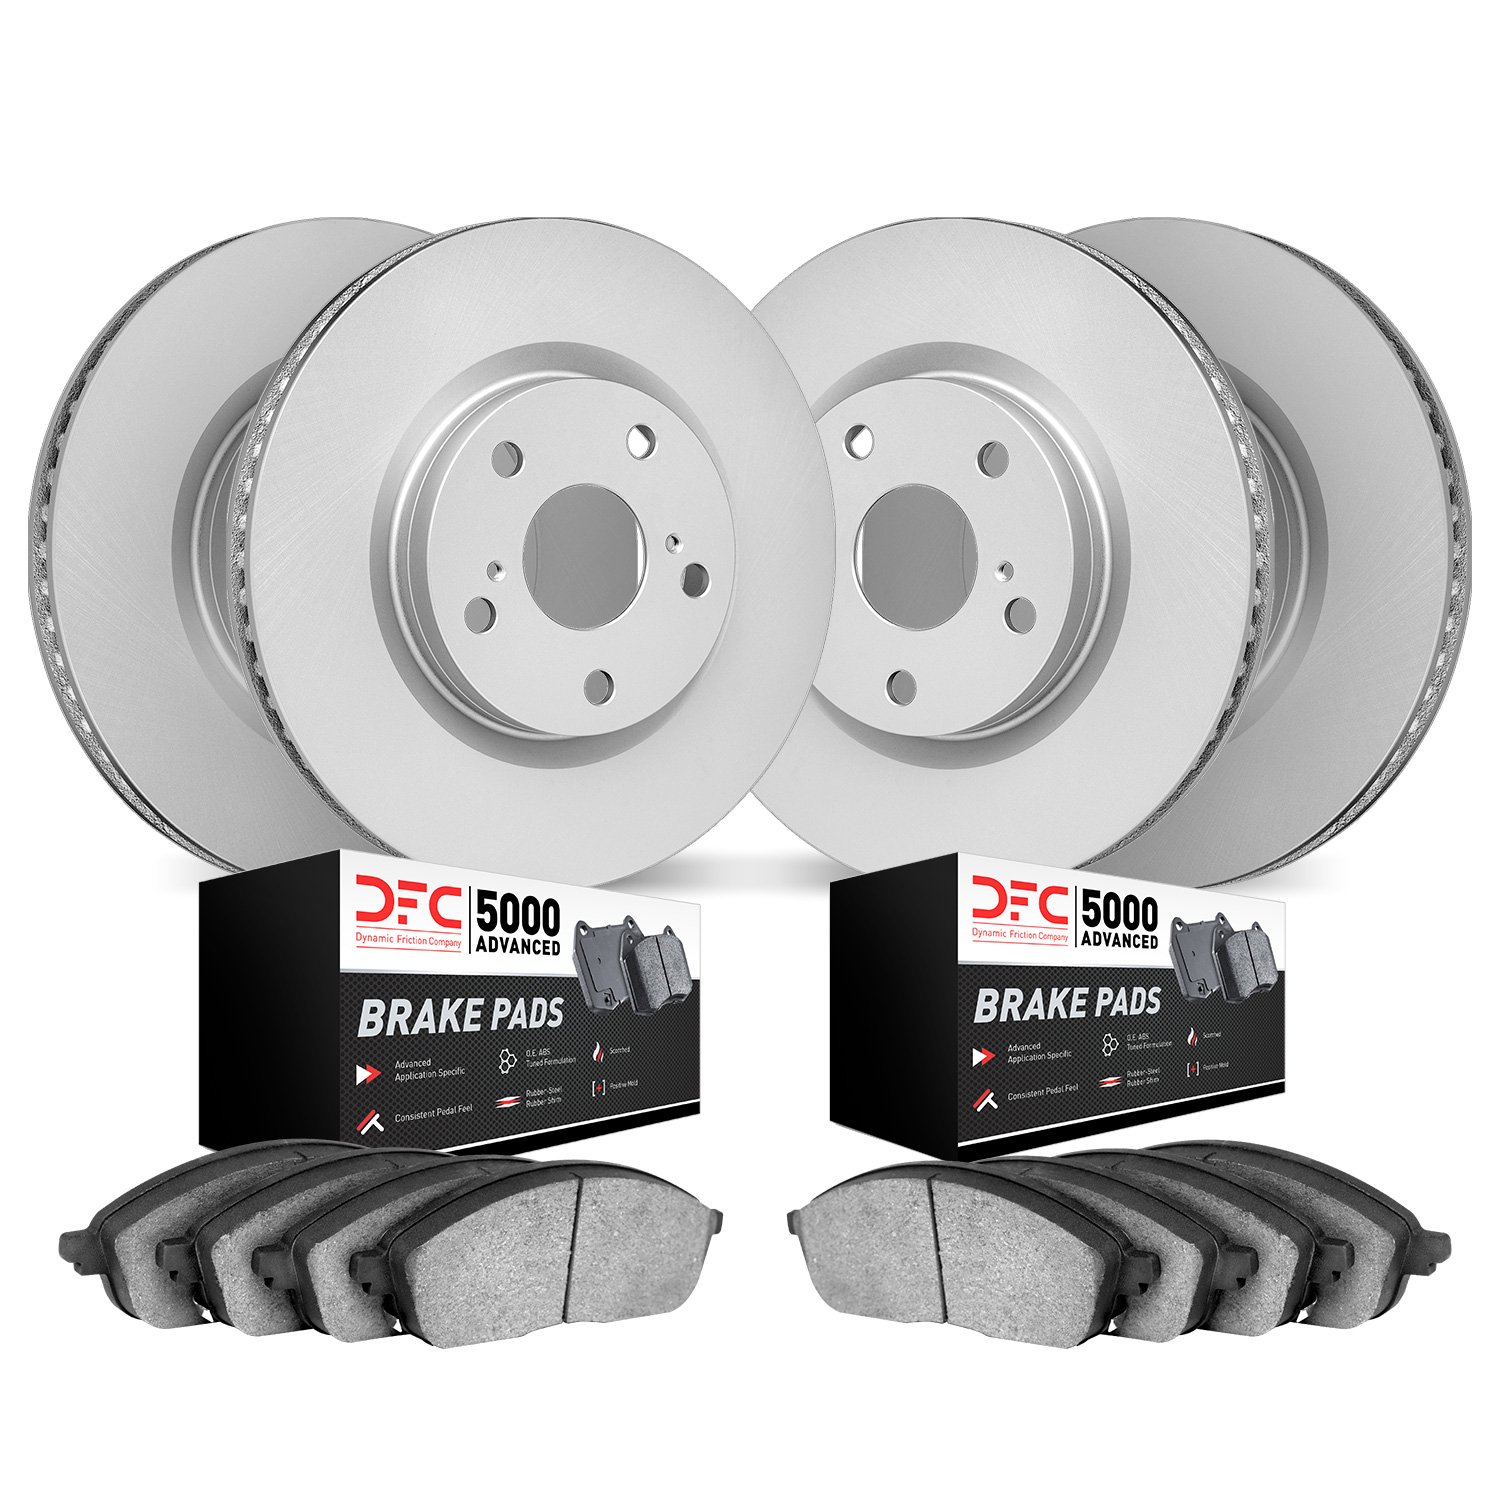 4504-46016 Geospec Brake Rotors w/5000 Advanced Brake Pads Kit, 2008-2014 GM, Position: Front and Rear